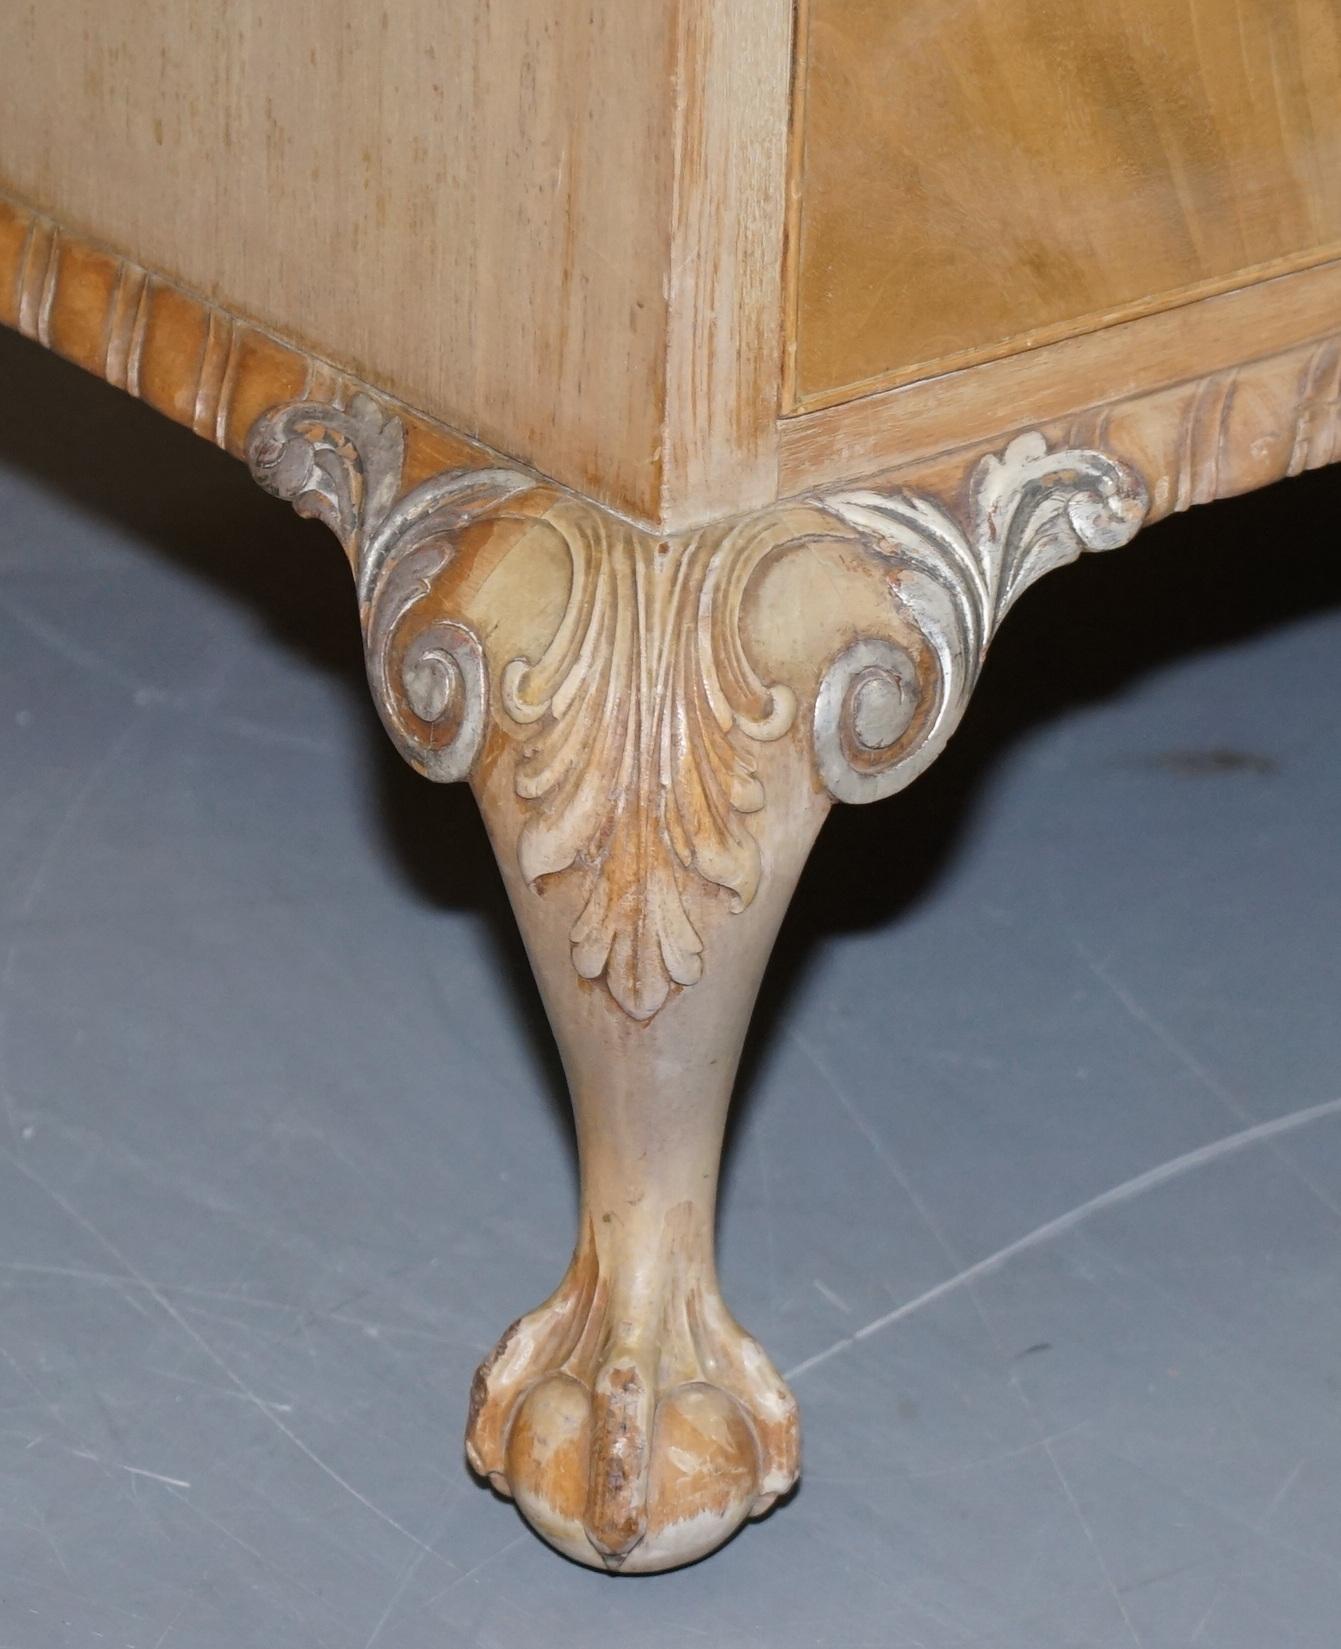 Hand-Crafted Stunning Gillows Vintage Chest of Drawers Ornate Claw & Ball Feet Part of Suite